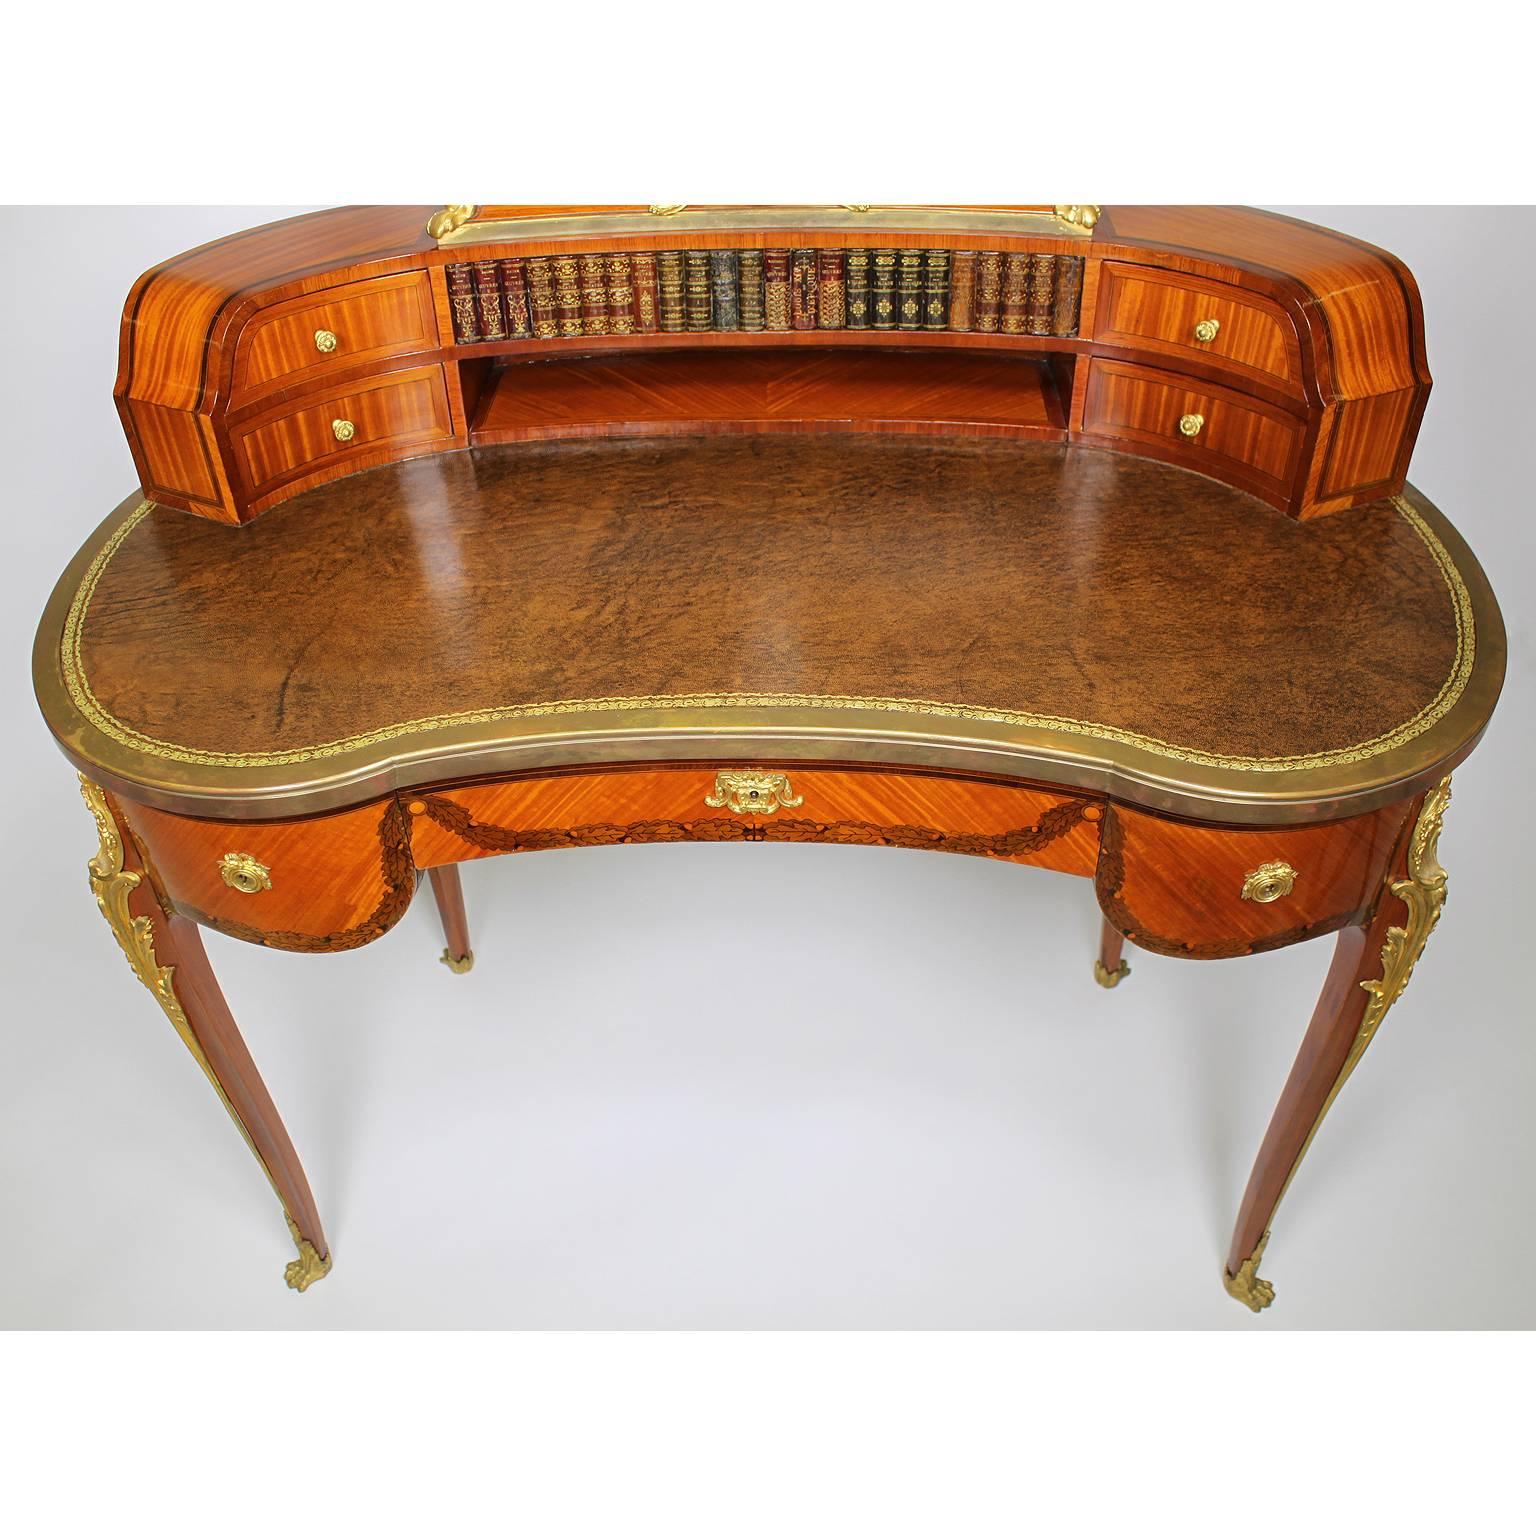 Fine French 19th Century Louis XV Style Tulipwood and Ormolu-Mounted Ladies Desk For Sale 3